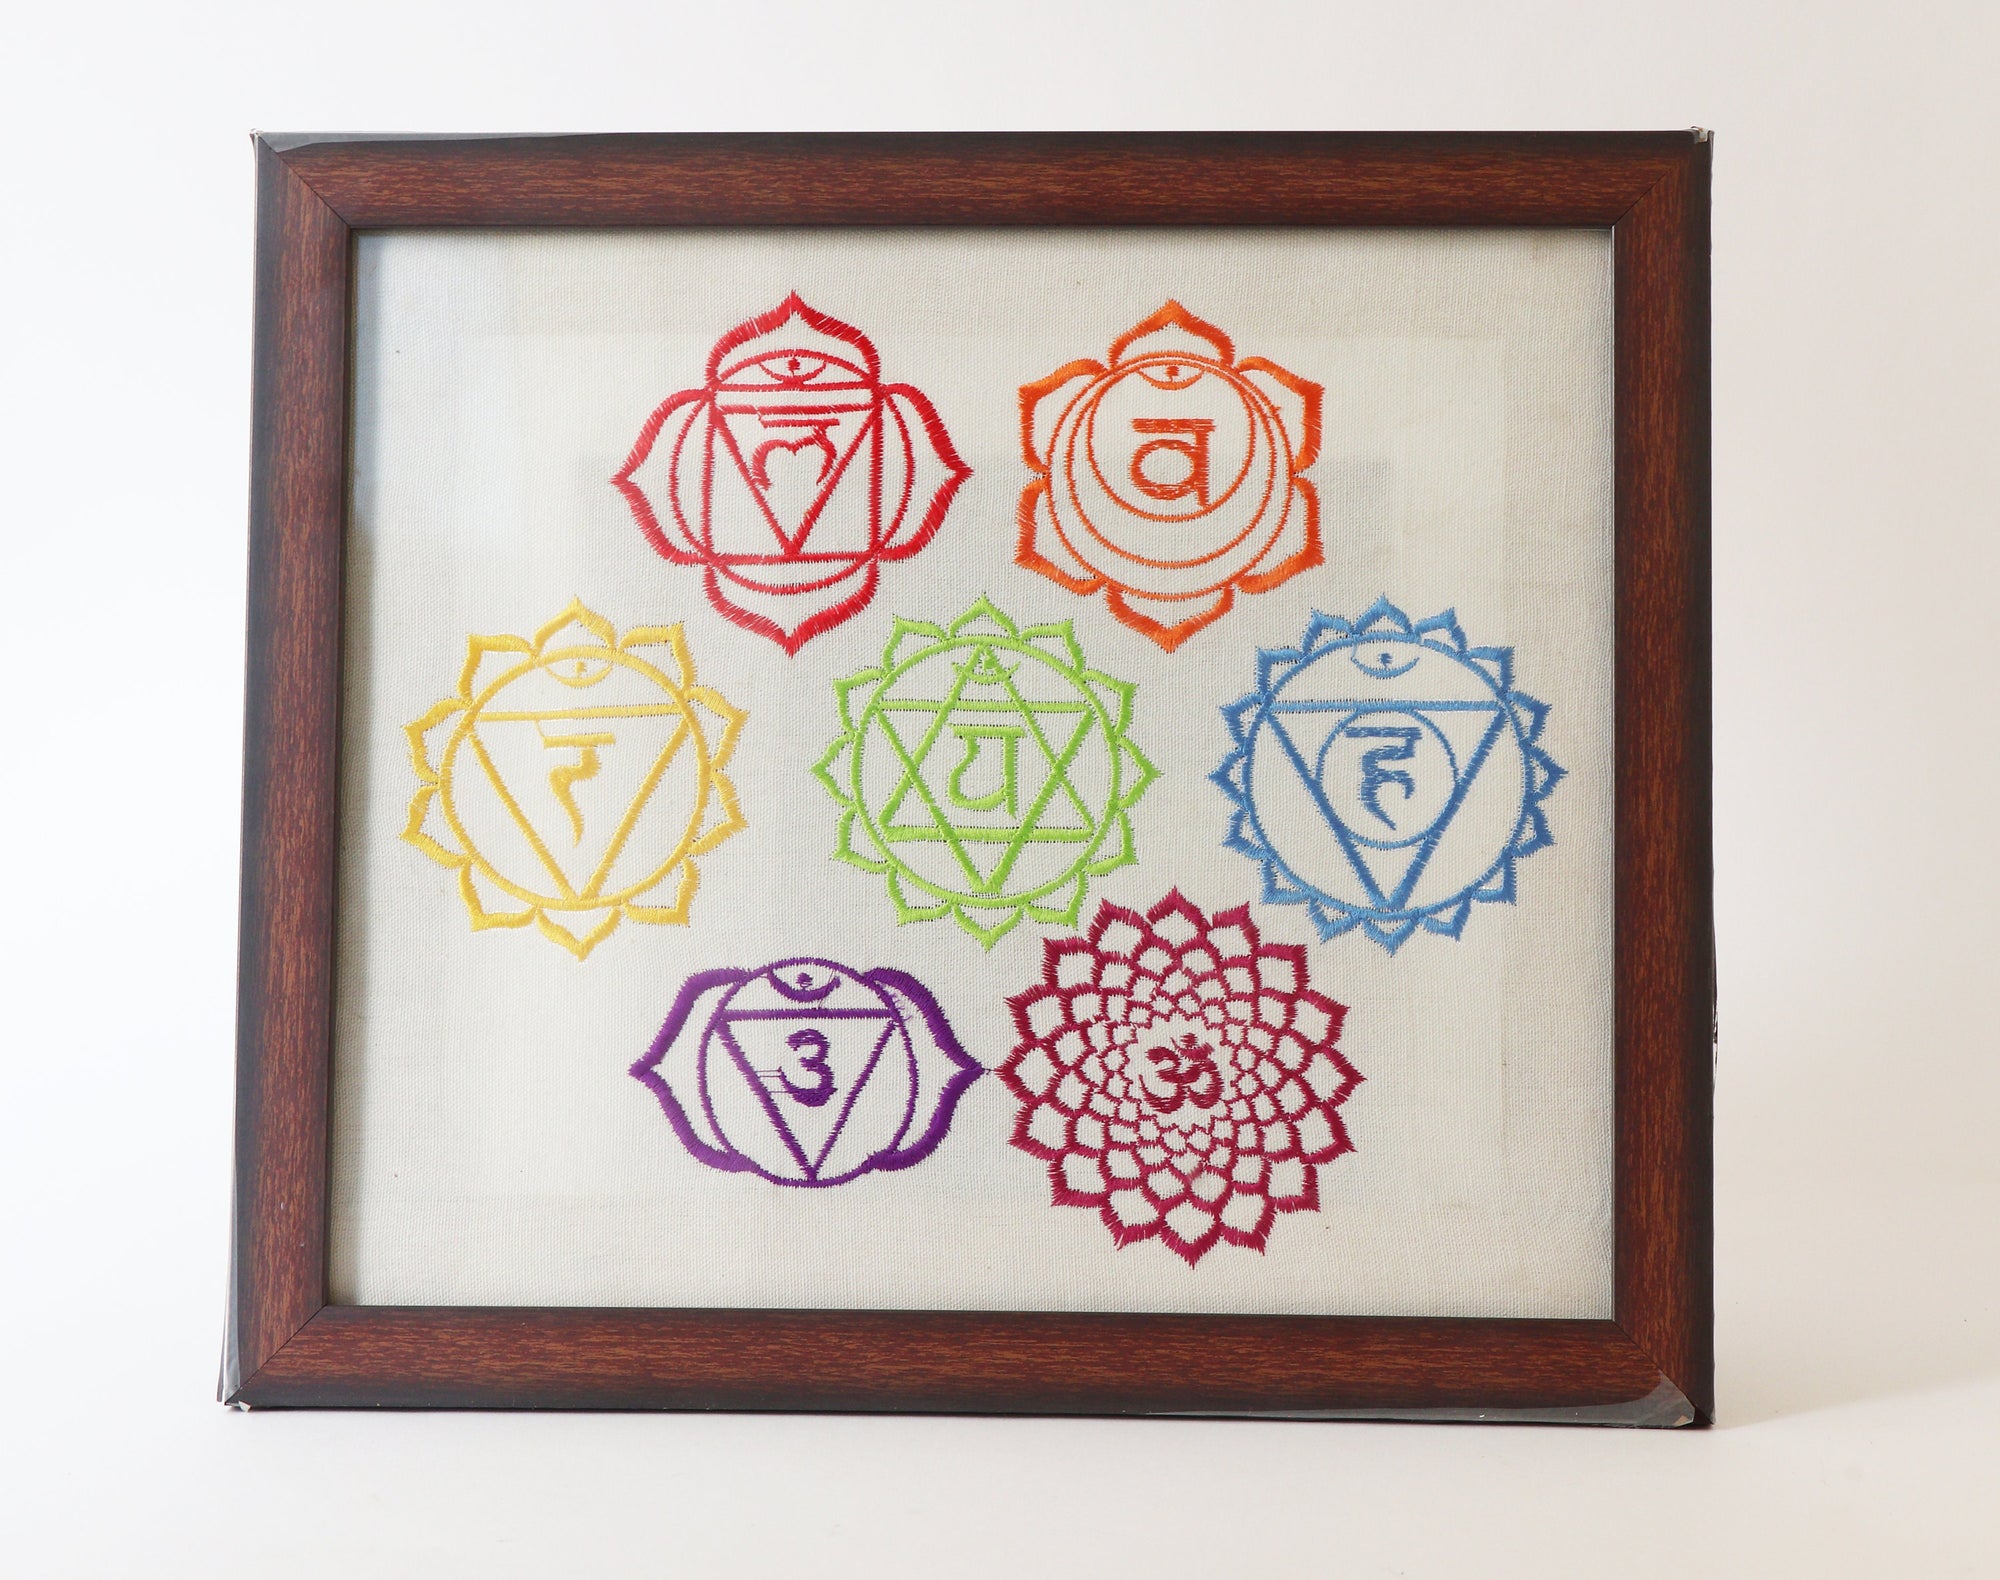 Gift - Seven Chakra Embroidered Picture Frame (Wood Brown Finish) - For Meditation, Yoga Studio, Home Decor - Made in India